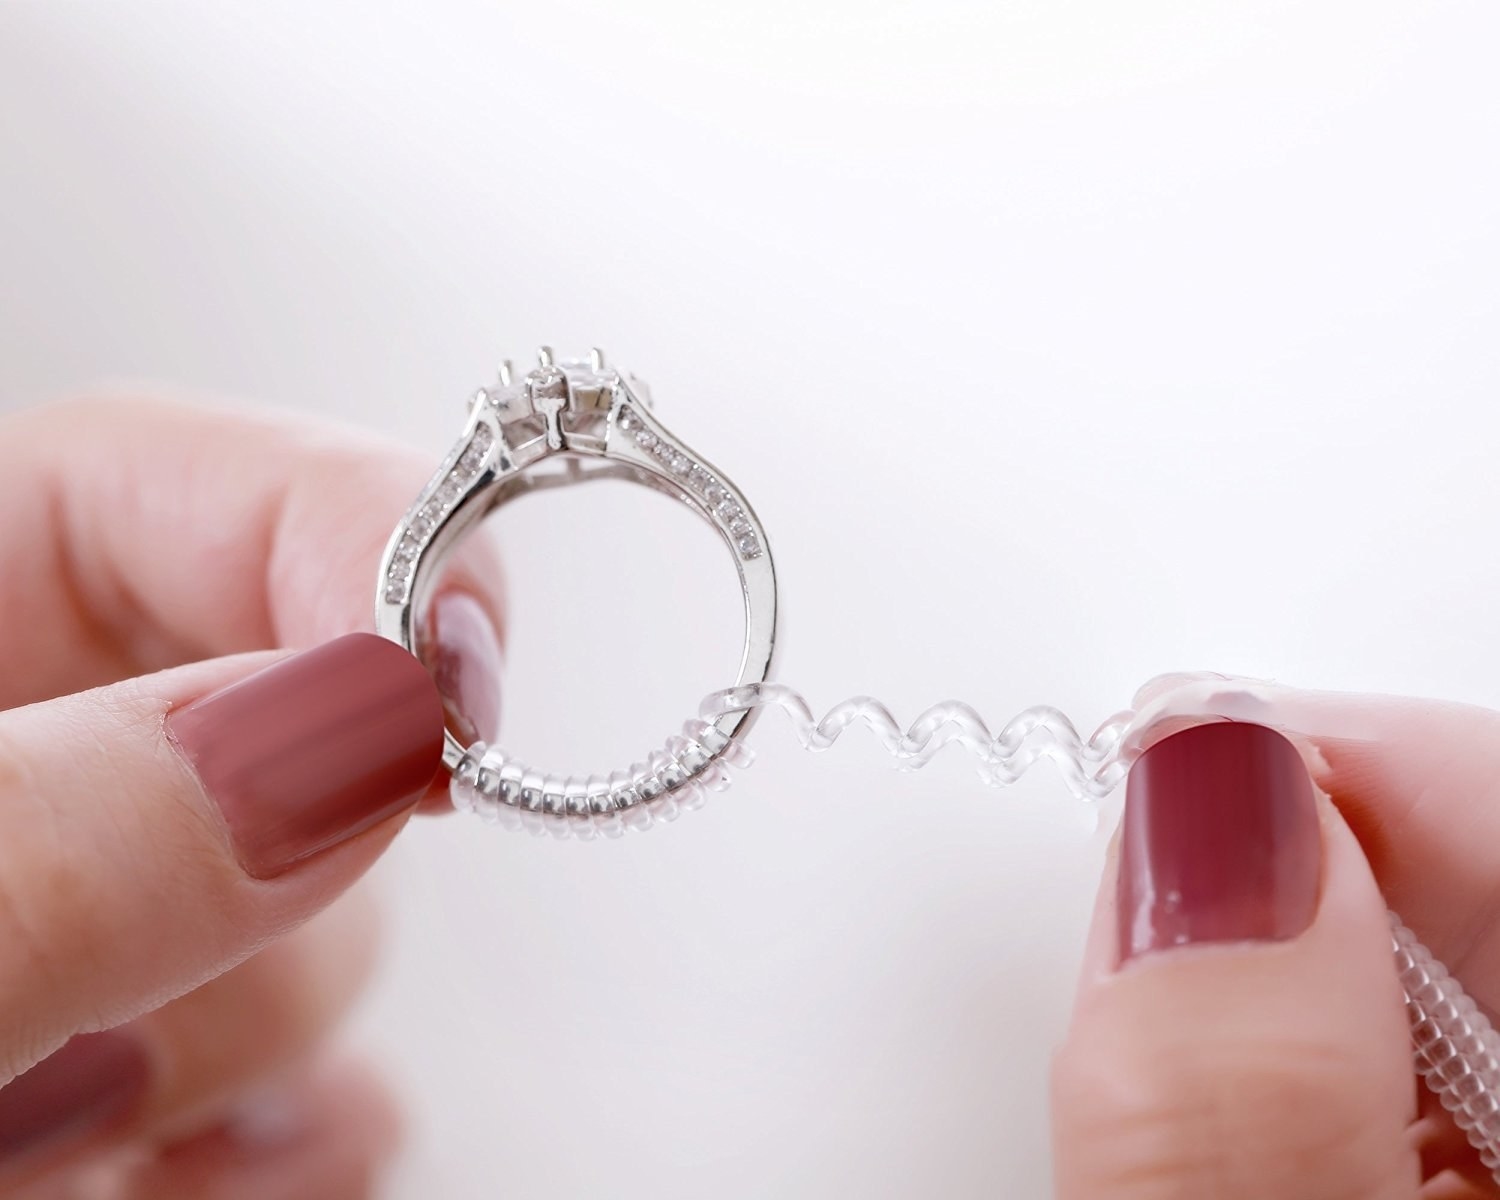 Hands winding the spiral onto an engagement-like ring